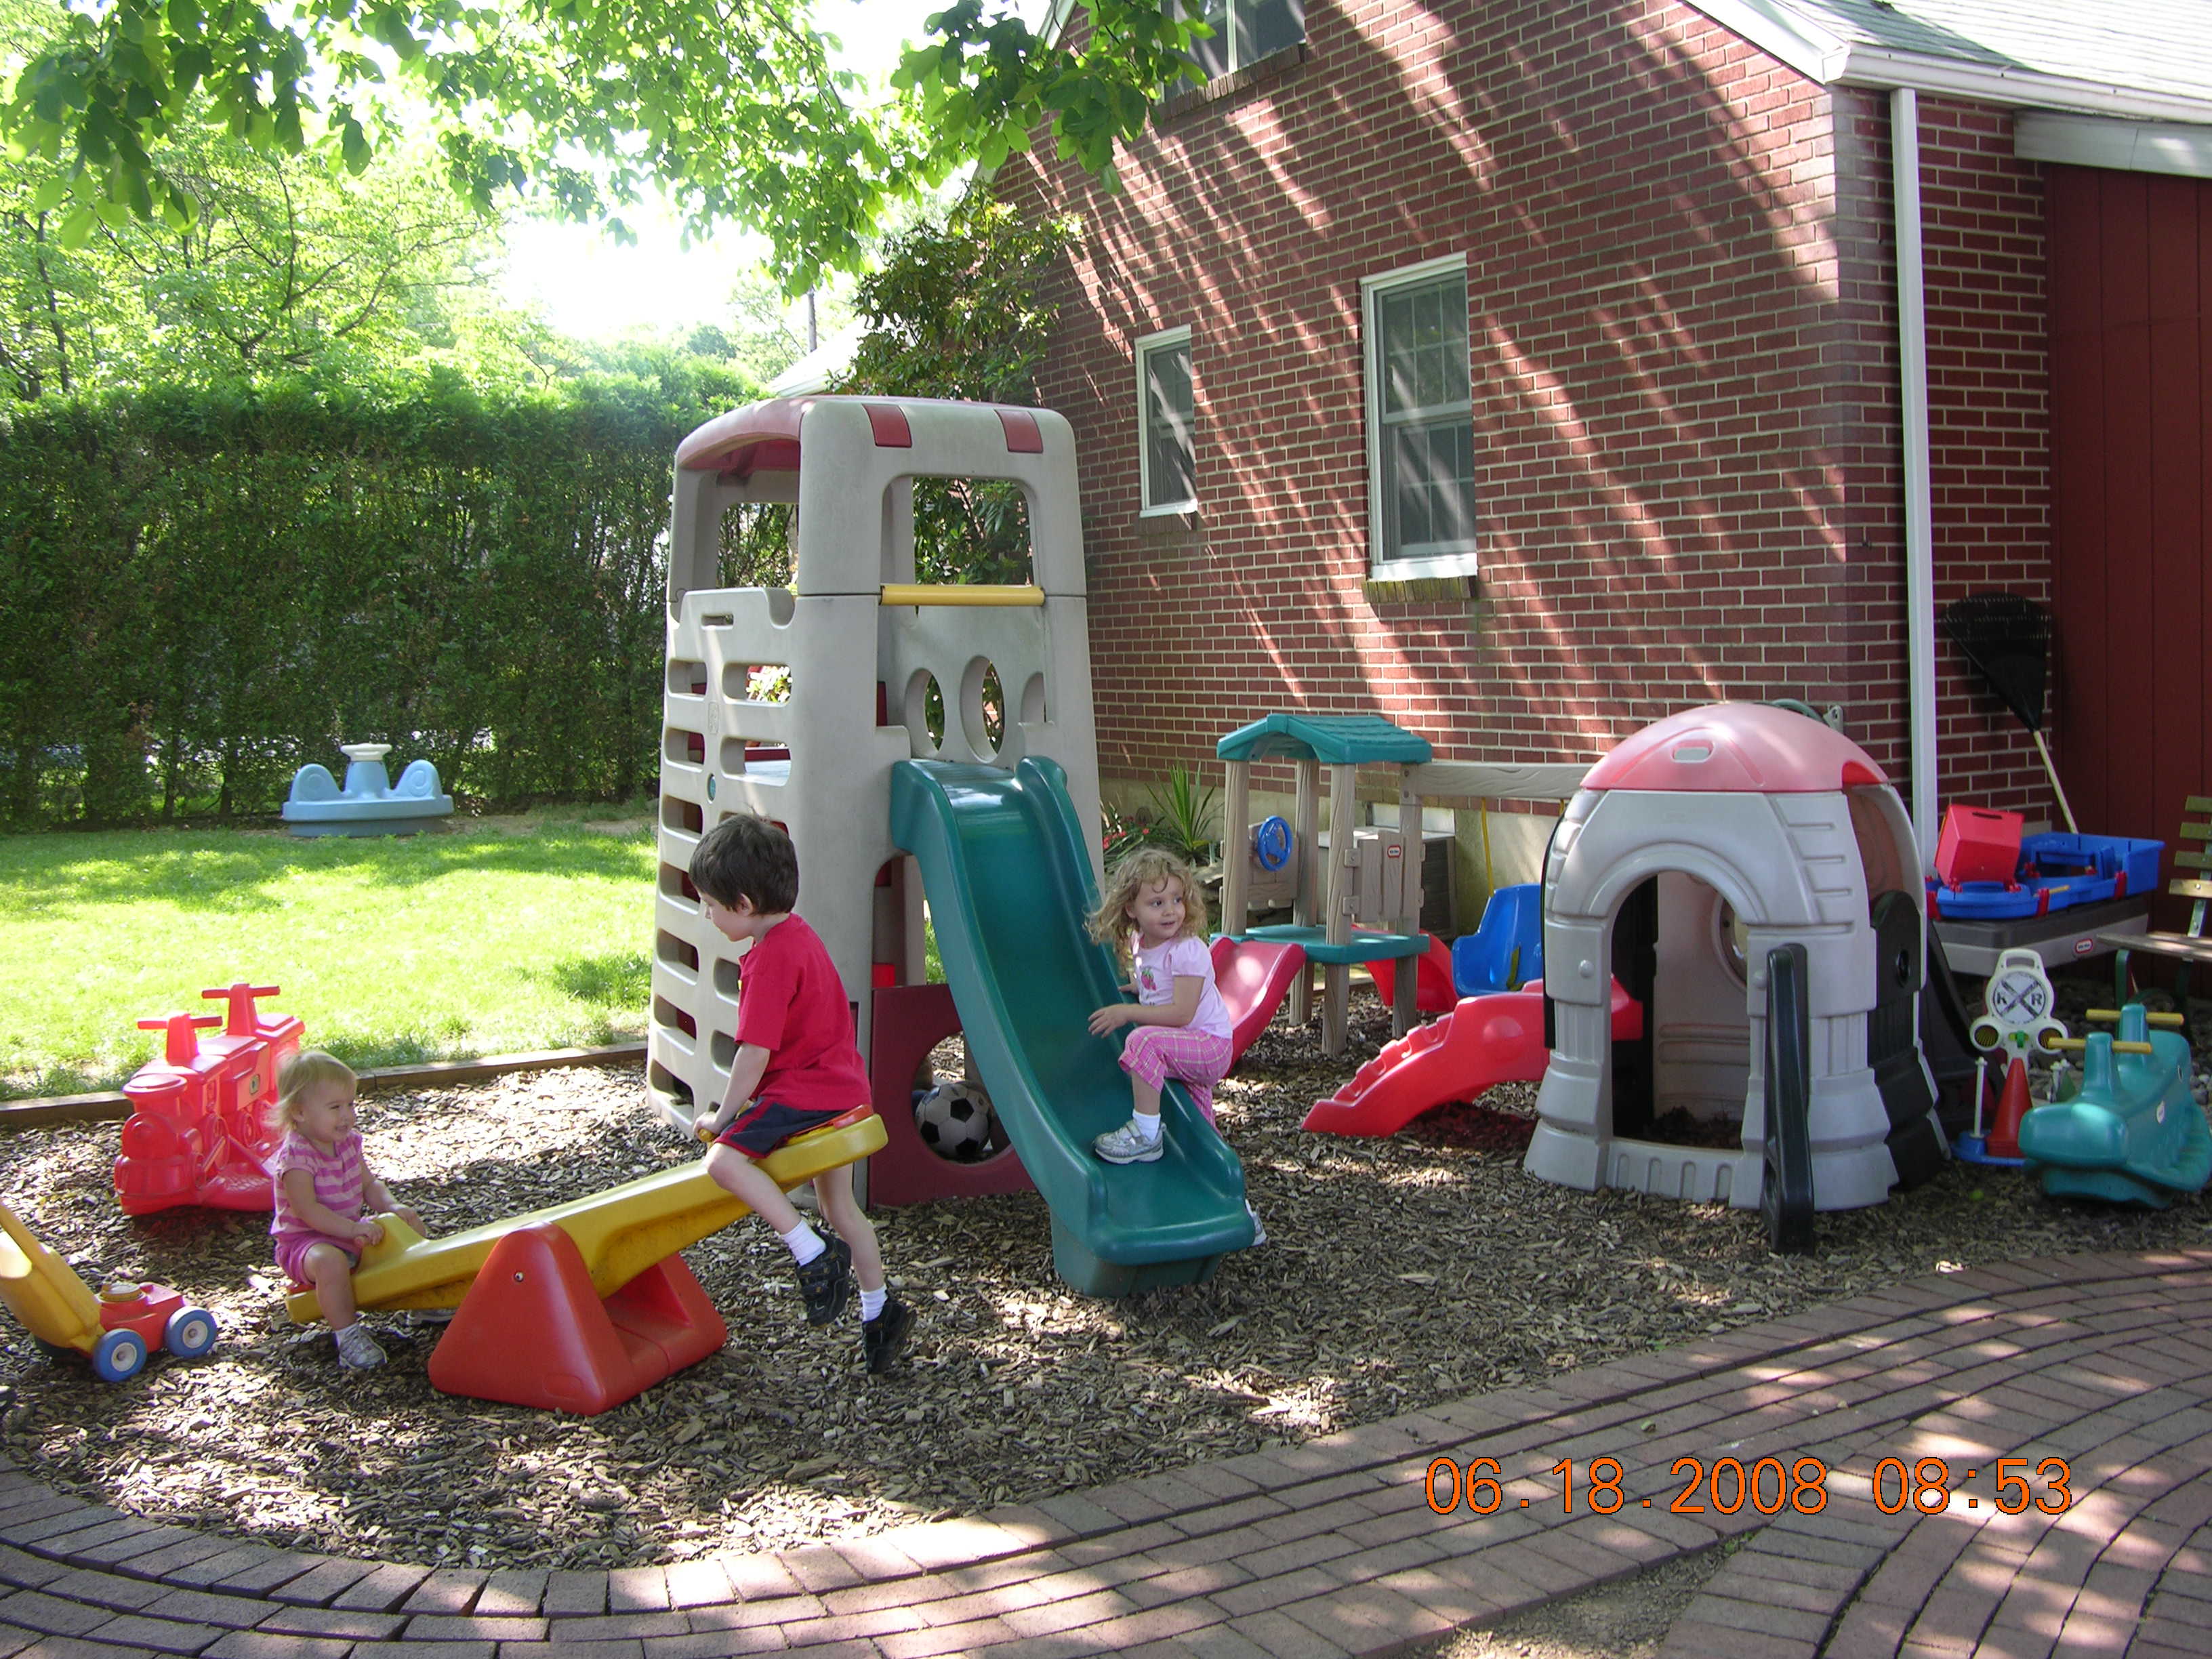 Children playing in the yard